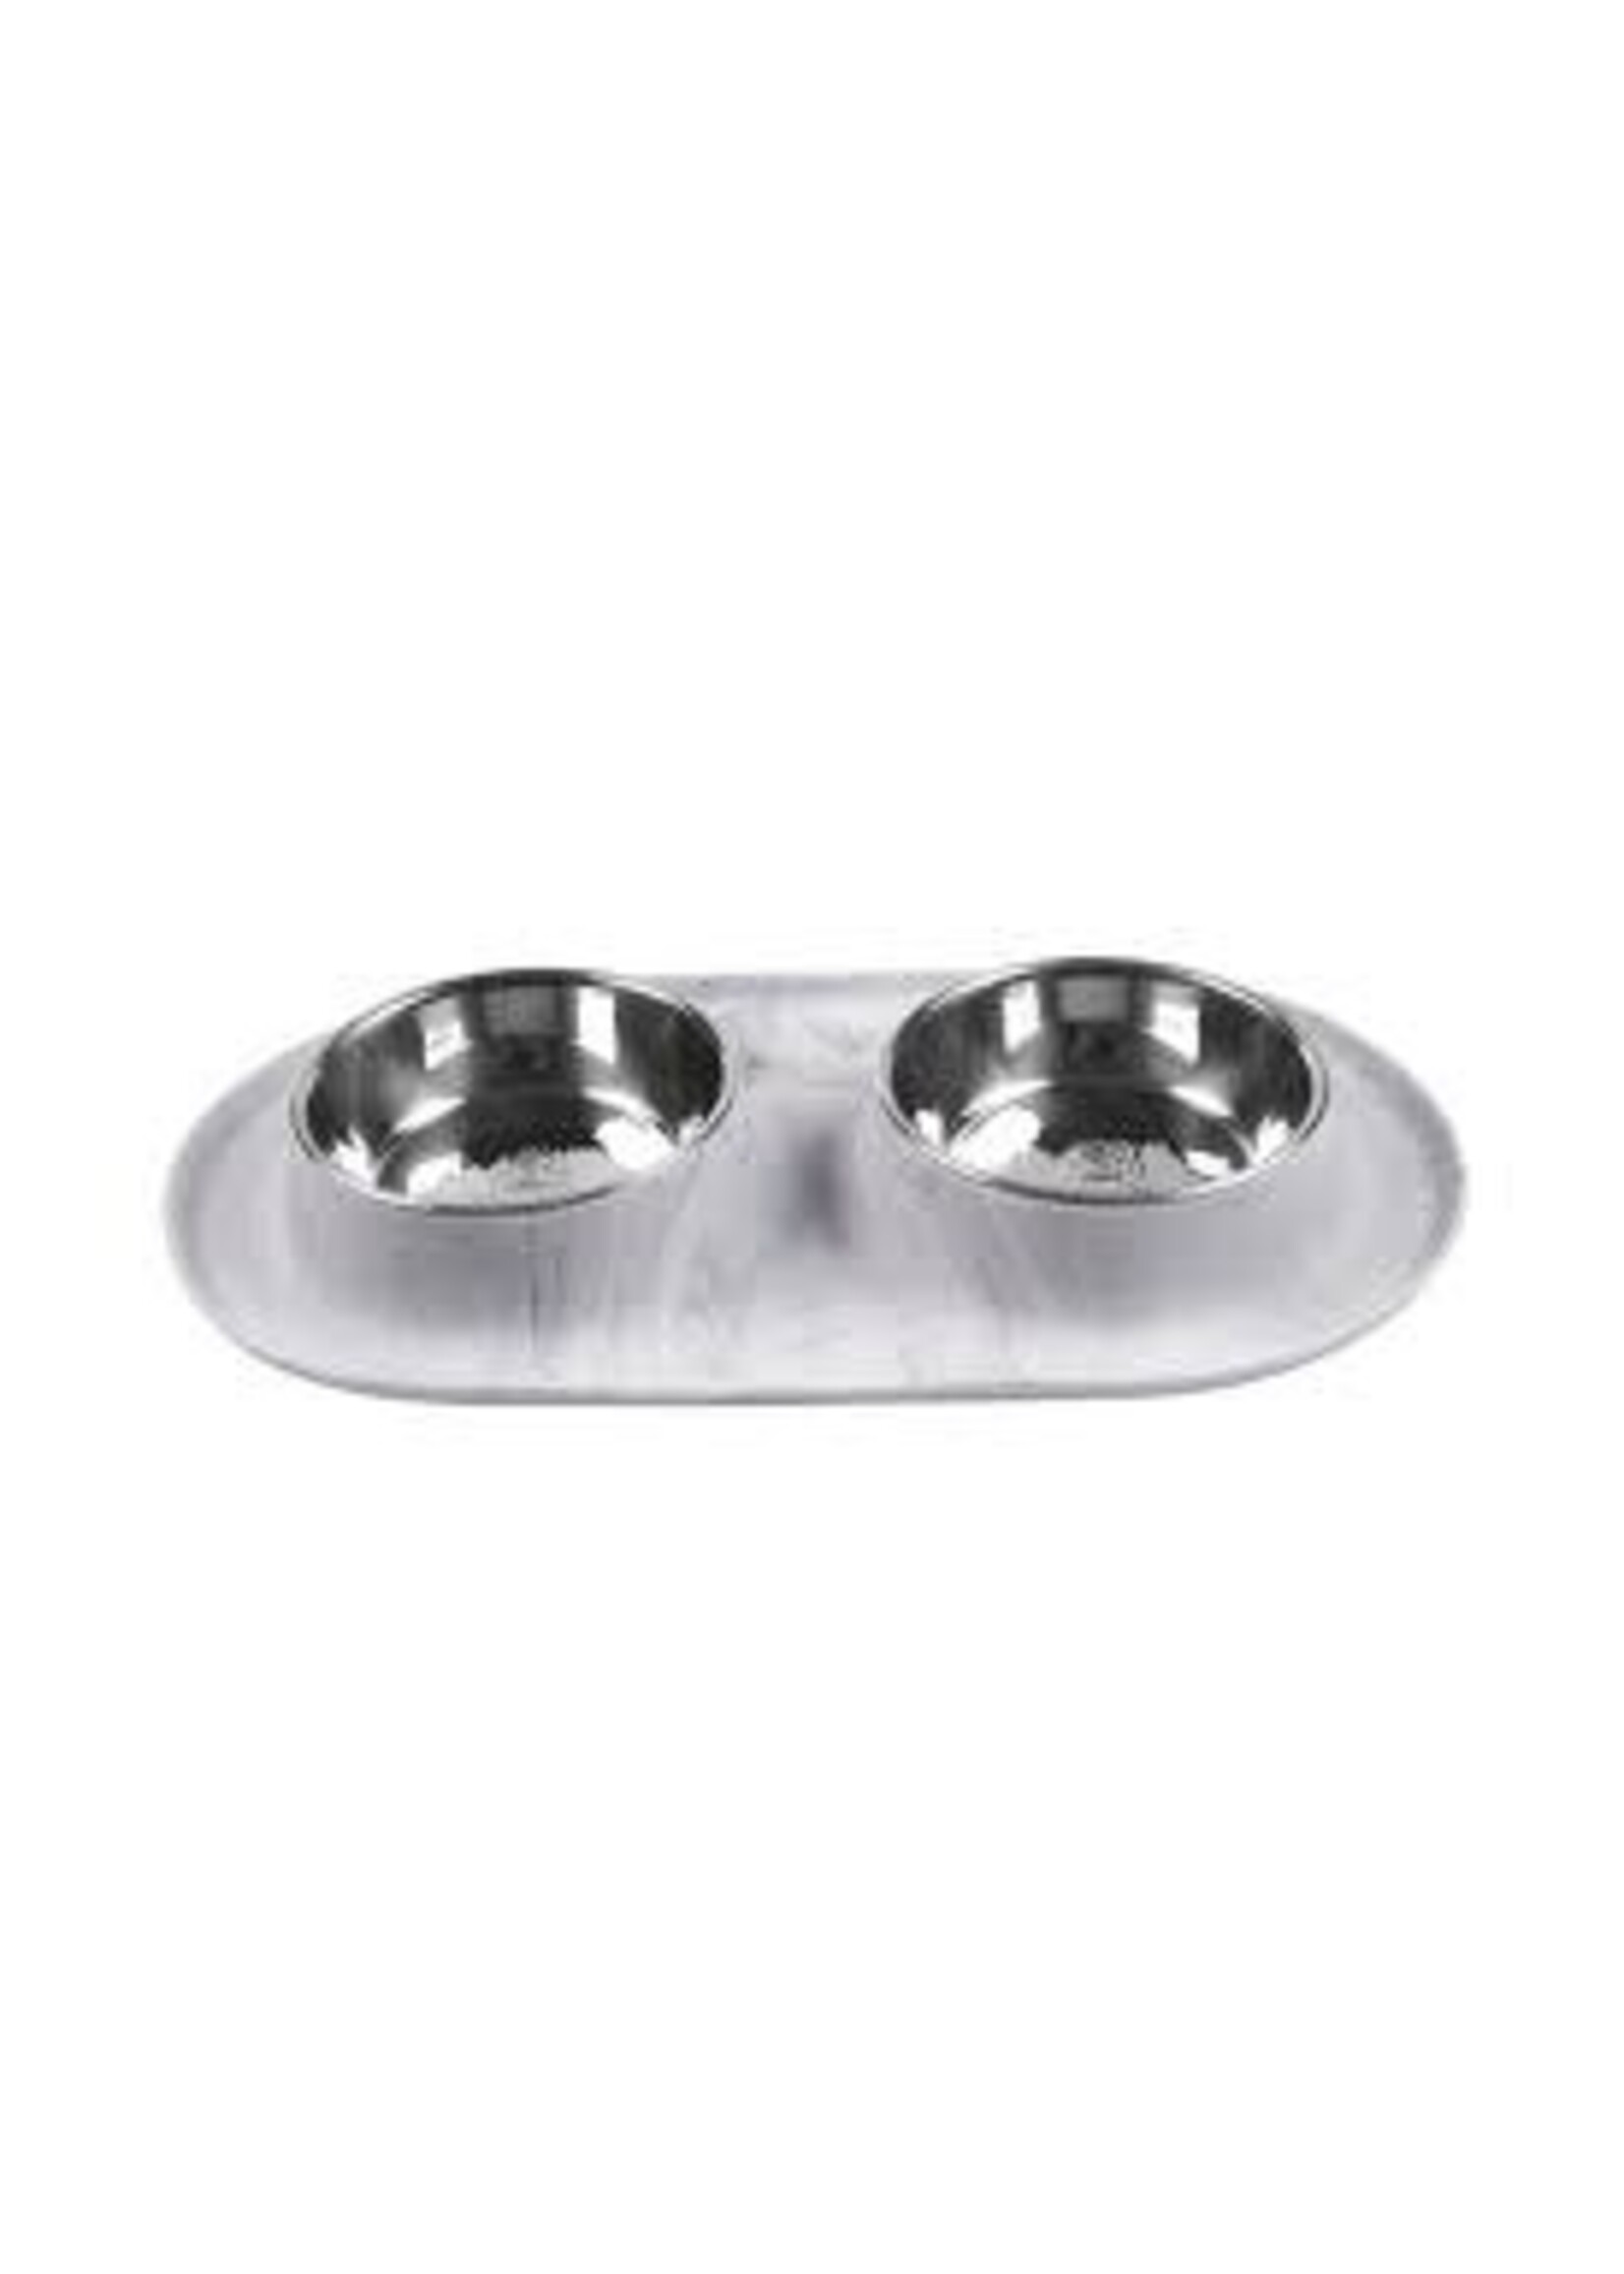 Messy Mutts Messy Mutts Double Silicone Feeder